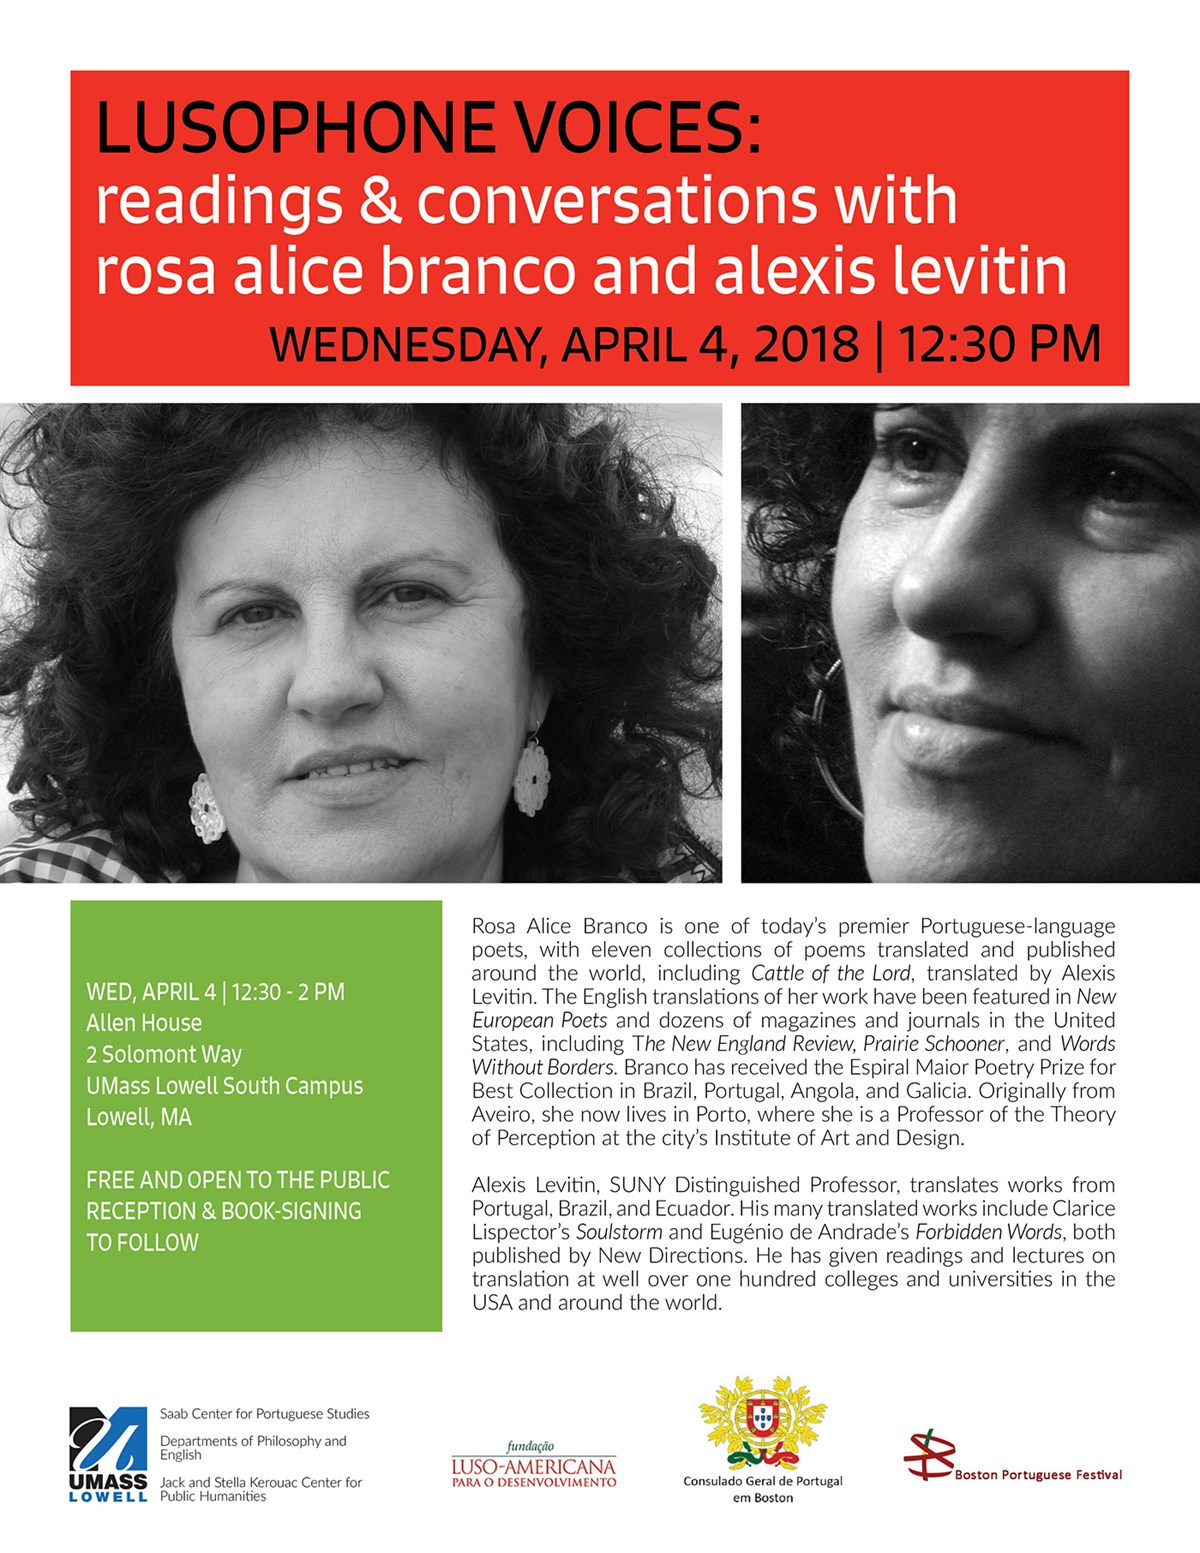 Lusophone Voices: Readings E Conversations with Rosa Alice Branco and Alexis Levitin. Wednesday, April 4, 2018 at 12:30 p.m.  Allen House, 2 Solomont Way, UMass Lowell South Campus, Lowell, MA  FREE AND OPEN TO THE PUBLIC RECEPTION & BOOK-SIGNING TO FOLLOW.